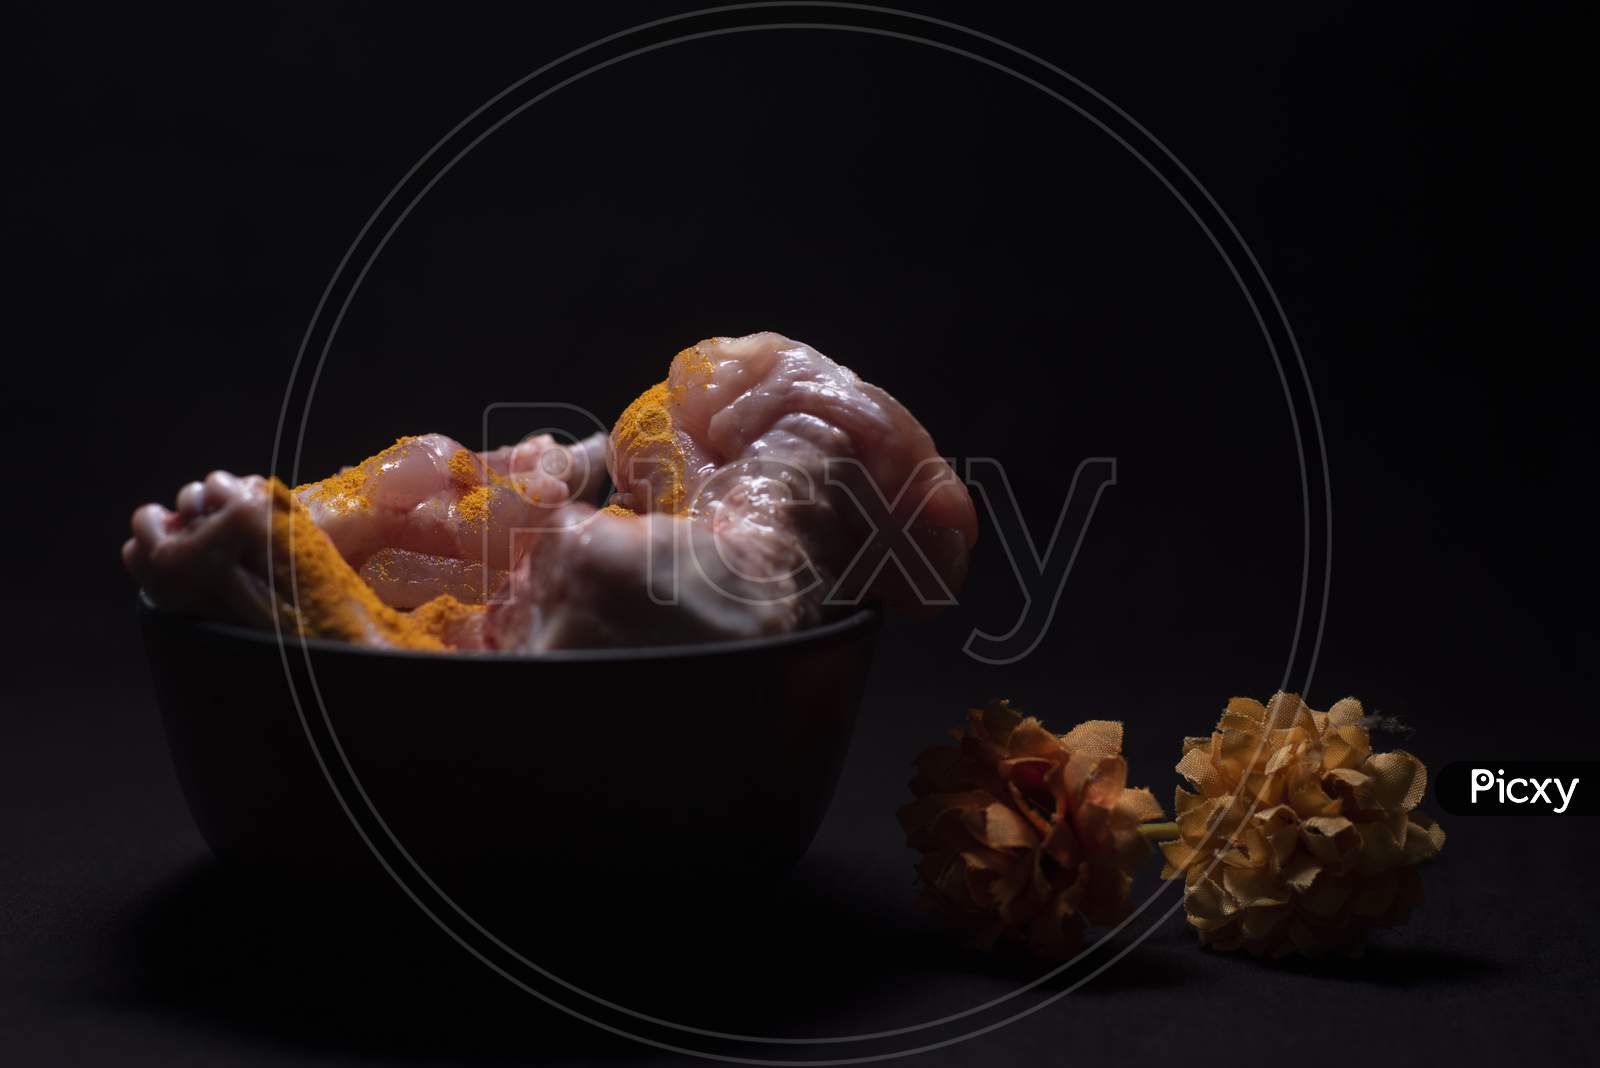 A Bowl Of Raw Chicken Pieces Sprinkled With Turmeric Powder Decorated With Dried Flowers In A Dark Copy Space Background. Food And Product Photography.